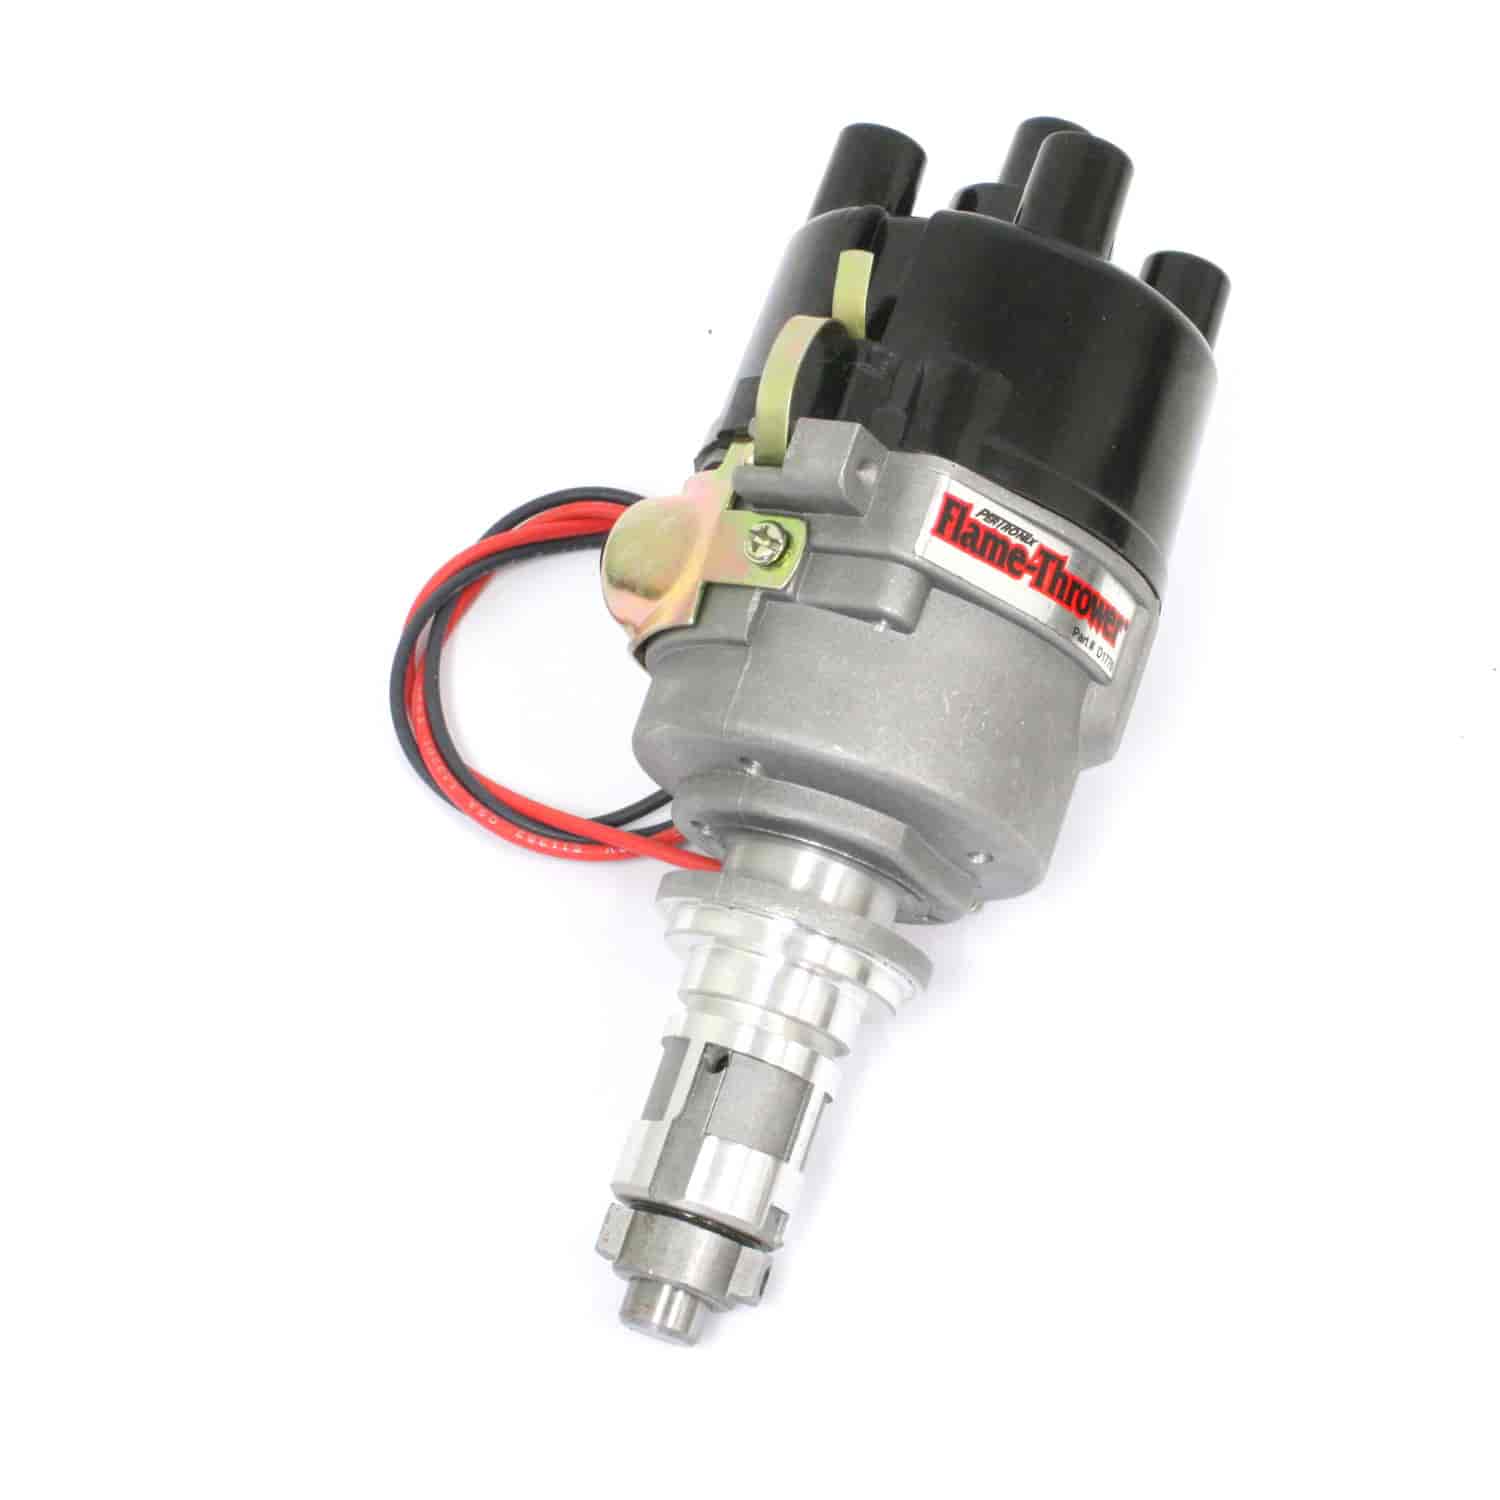 Flame Thrower Cast Distributor British A+, 4 Cyl